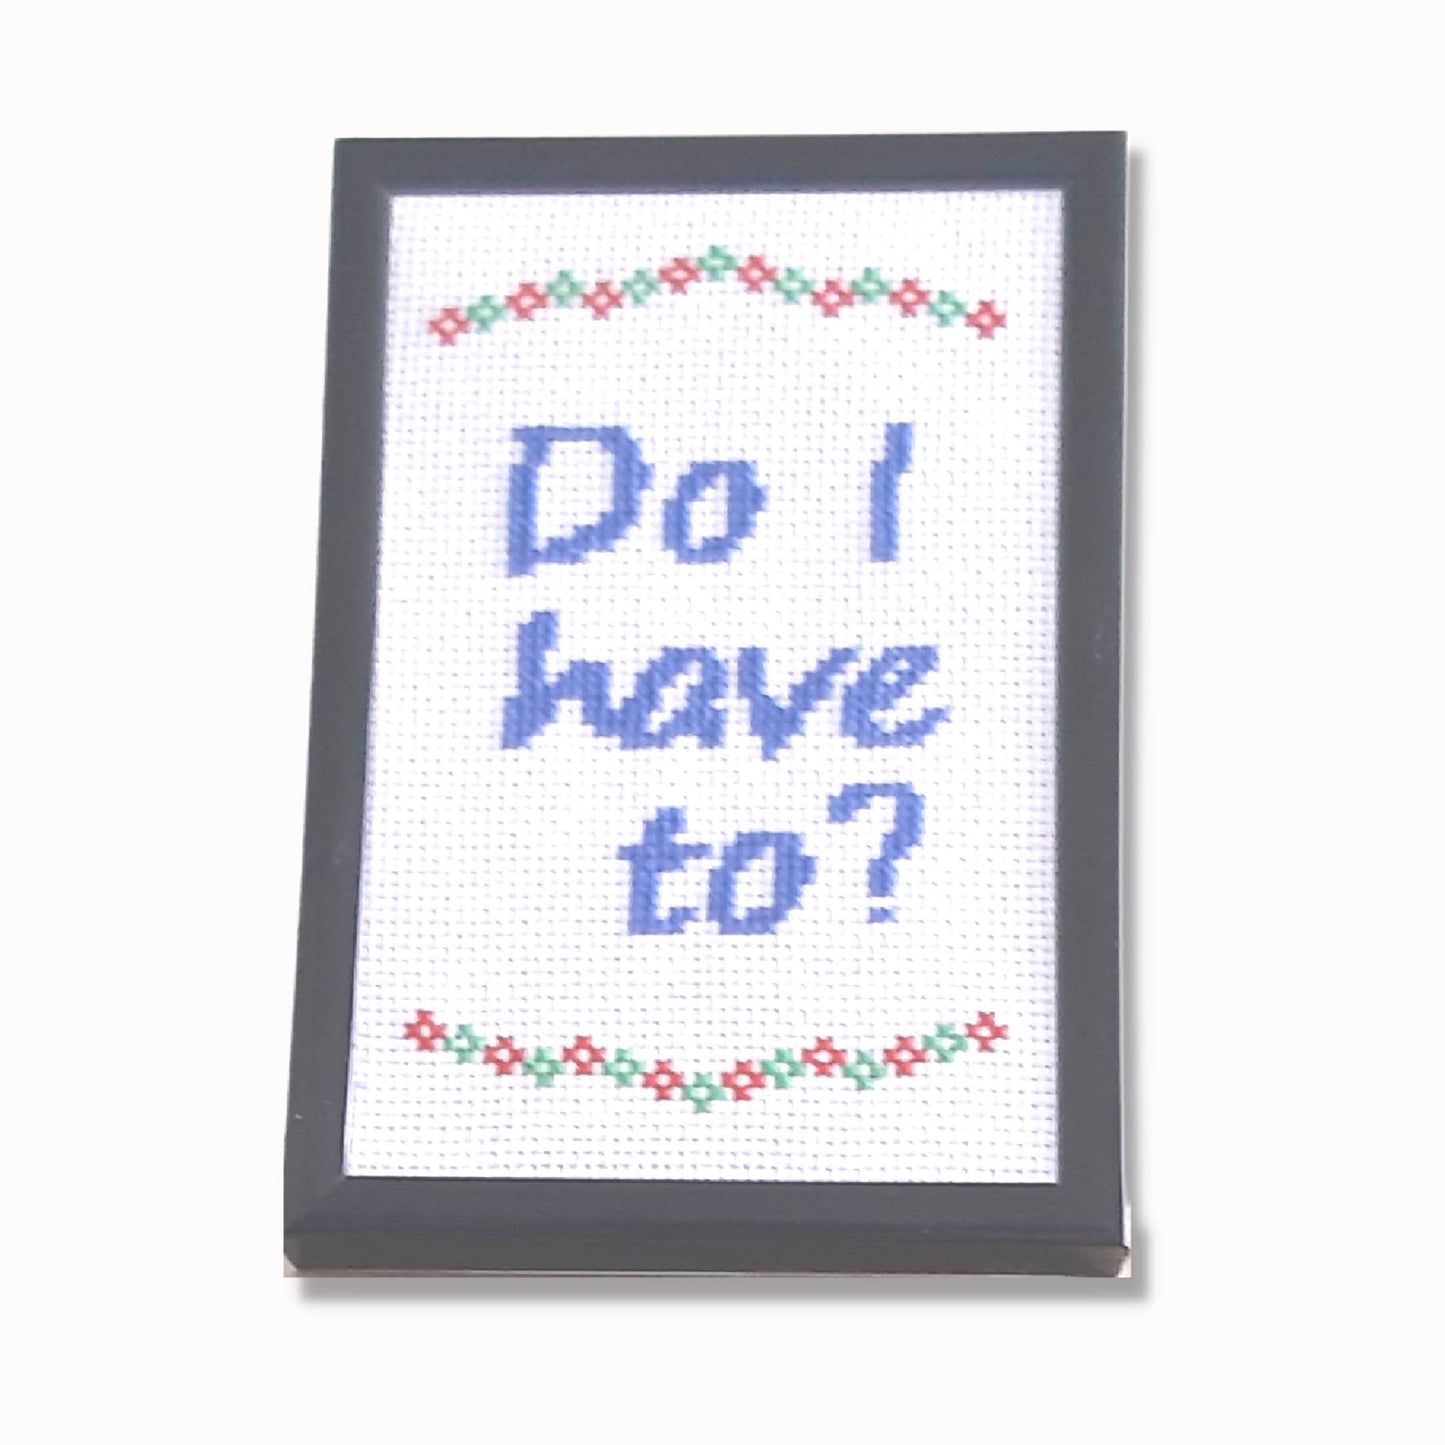 Do I have to?, completed cross stitch quote